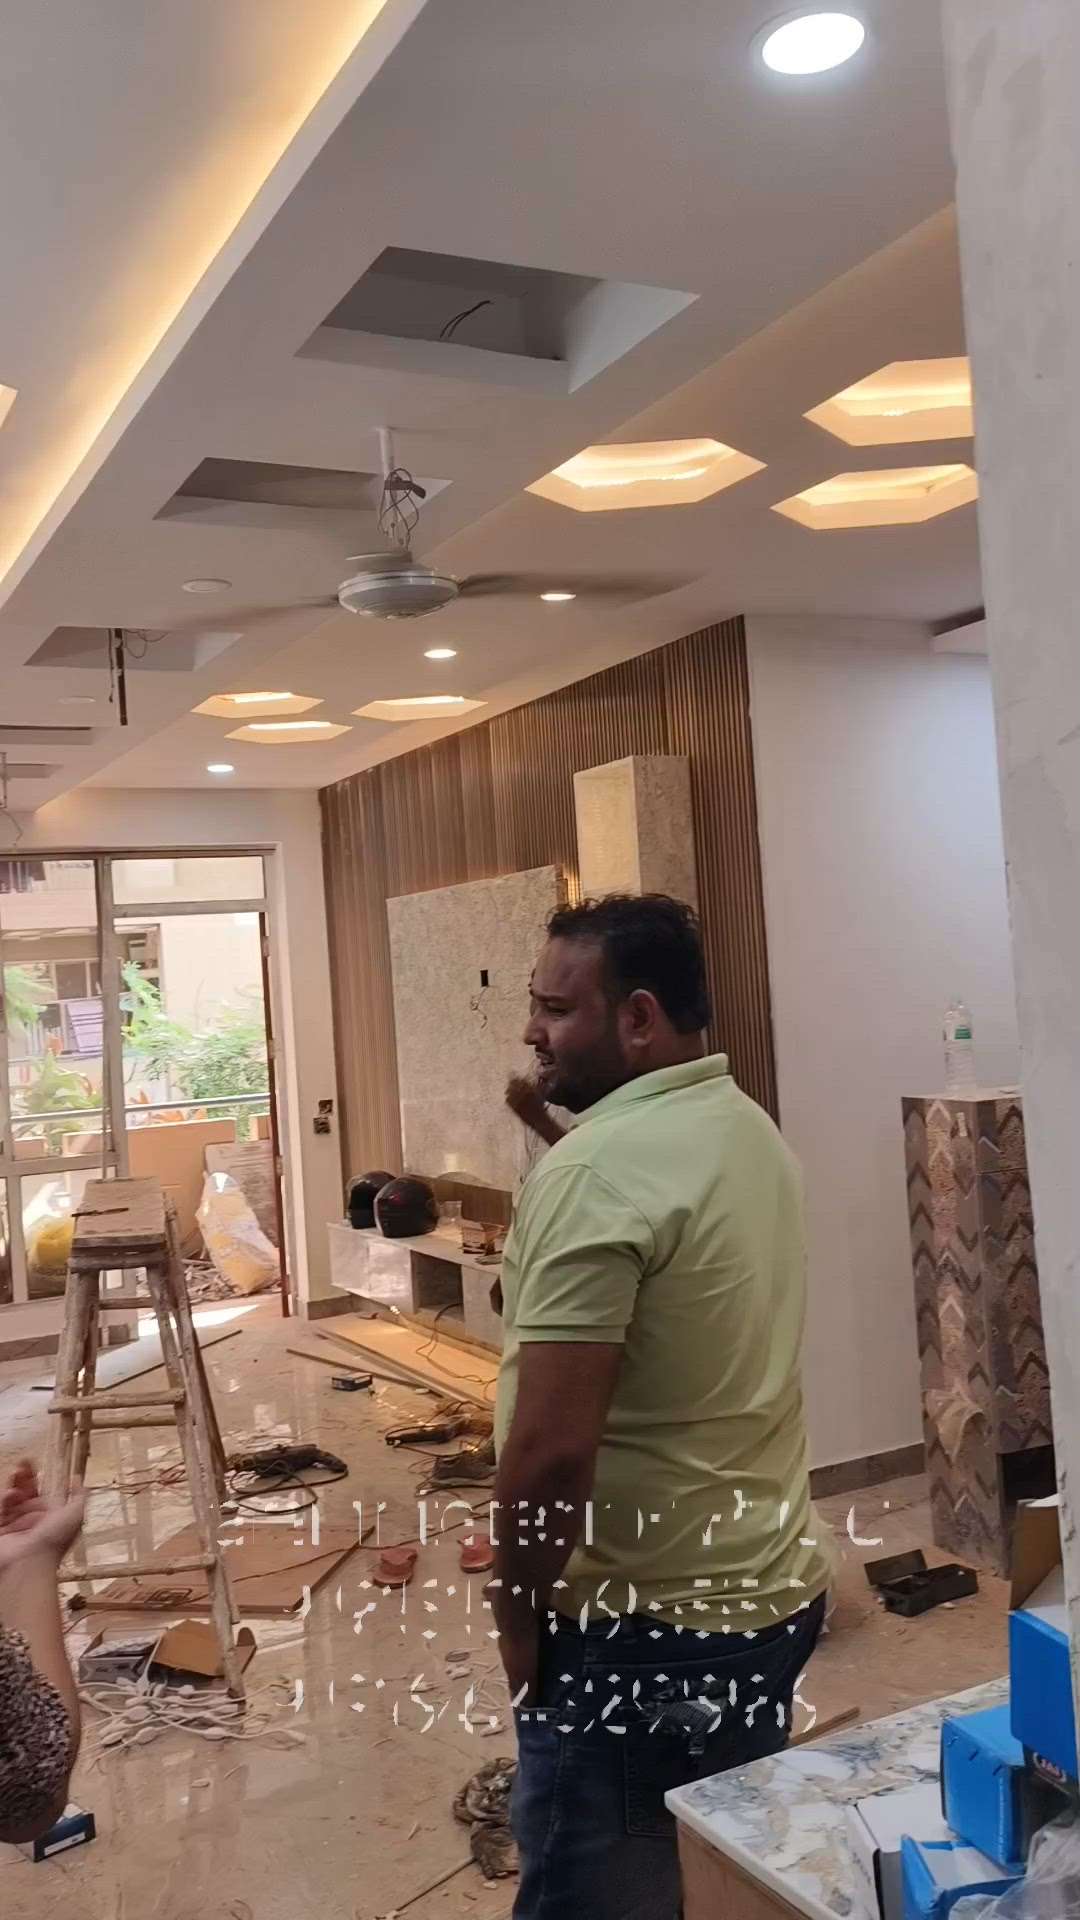 Arani interior pvt Ltd
Contact : 8510965559
https://wa.me/+918510965559

We are a leader in creating inspiring Commercial, Residential interior and turnkey interior design & build company in noida.
-Interior Design Consulting
-Trunkey Interior Contracting
-Move Management
-Soft Furnishing
-MEP Design & Contracting
-Interior Renovation

* Standard Interiors 
  2 Bhk - 3,90,000/- 
  3 Bhk - 4,90,000/- 
  4 Bhk -  5,90,000/- 

* Premium Interiors 
  2 Bhk - 4,50,000/- 
  3 Bhk - 5,00,000/- 
  4 Bhk - 7,00,00,0/- 

* Luxury Interiors 
  2 Bhk - 8,00,00,0/- 
  3 Bhk - 10,00,00,0/- 
  4 Bhk - 12,00,00,0/- 

Aabsolute Interiors and Exteriors 
Find design ideas from our design gallery or book a meeting with a dedicated design expert

* 8 Years Warranty

* 15- 25 day Installation
Get your chosen products installed in 15 to 25 days

* Expert Designers
Create your dream home, fitting your lifestyle, with the help of our top designers.

But all these above PACKAGEs are fixed along with measurement